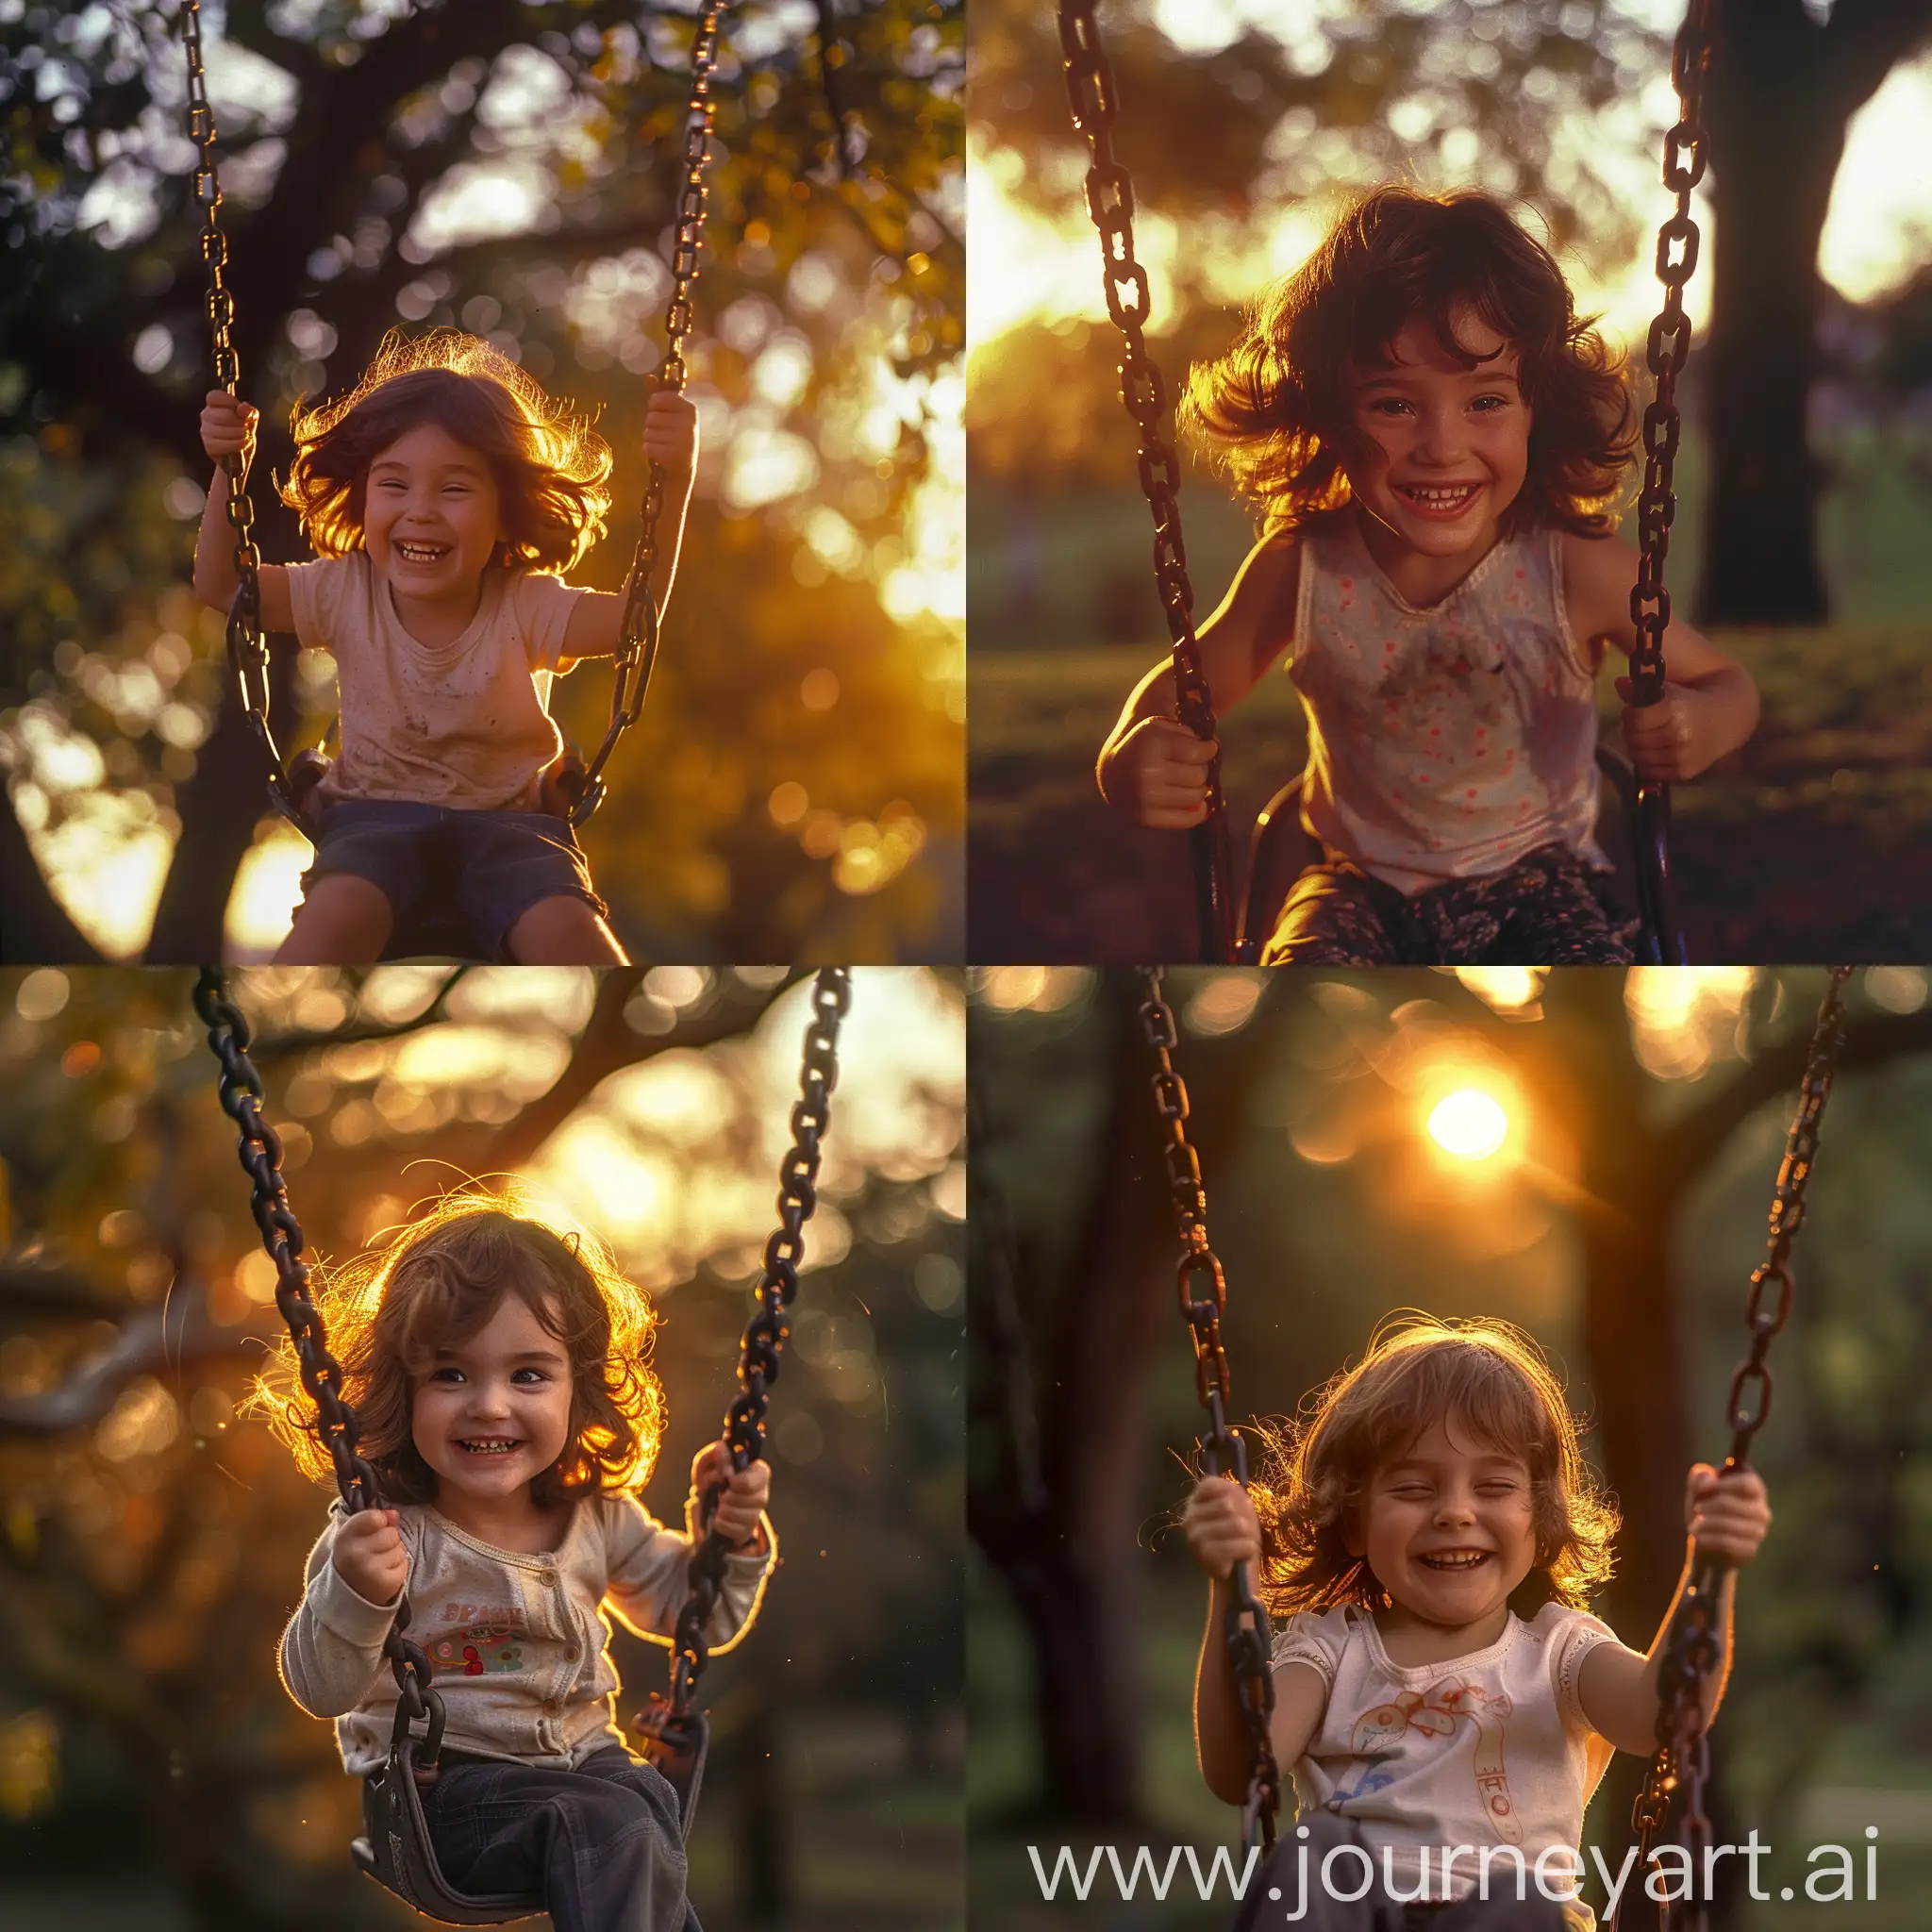 Cheerful-Child-Swinging-at-Sunset-in-Park-Joyous-Mood-Captured-by-Steve-McCurry